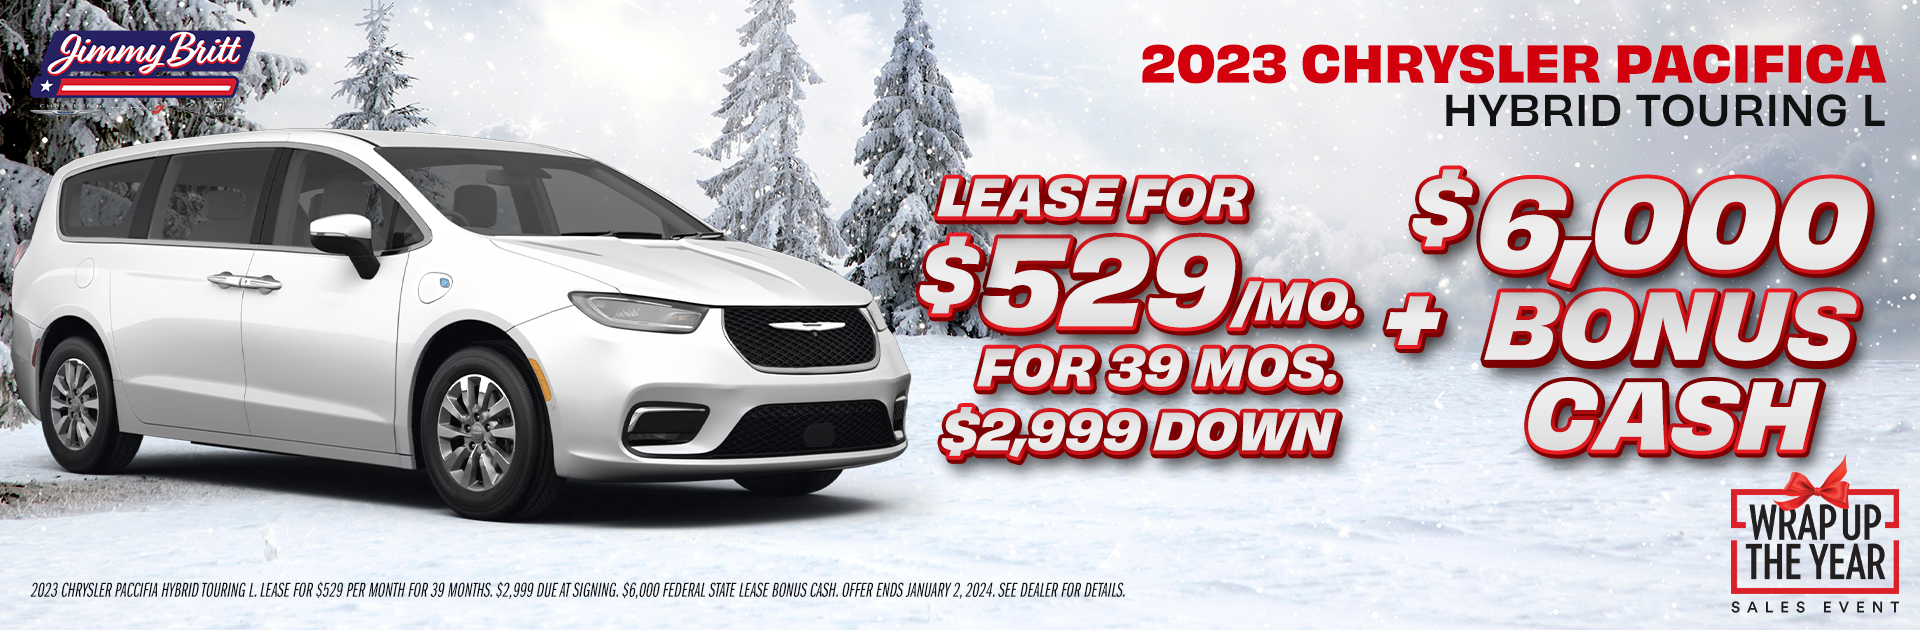 2023 Chrysler Pacifica Hybrid Touring L: Lease for $529 per month for 39 months with $2,999 due + $6,000 Bonus Cash!